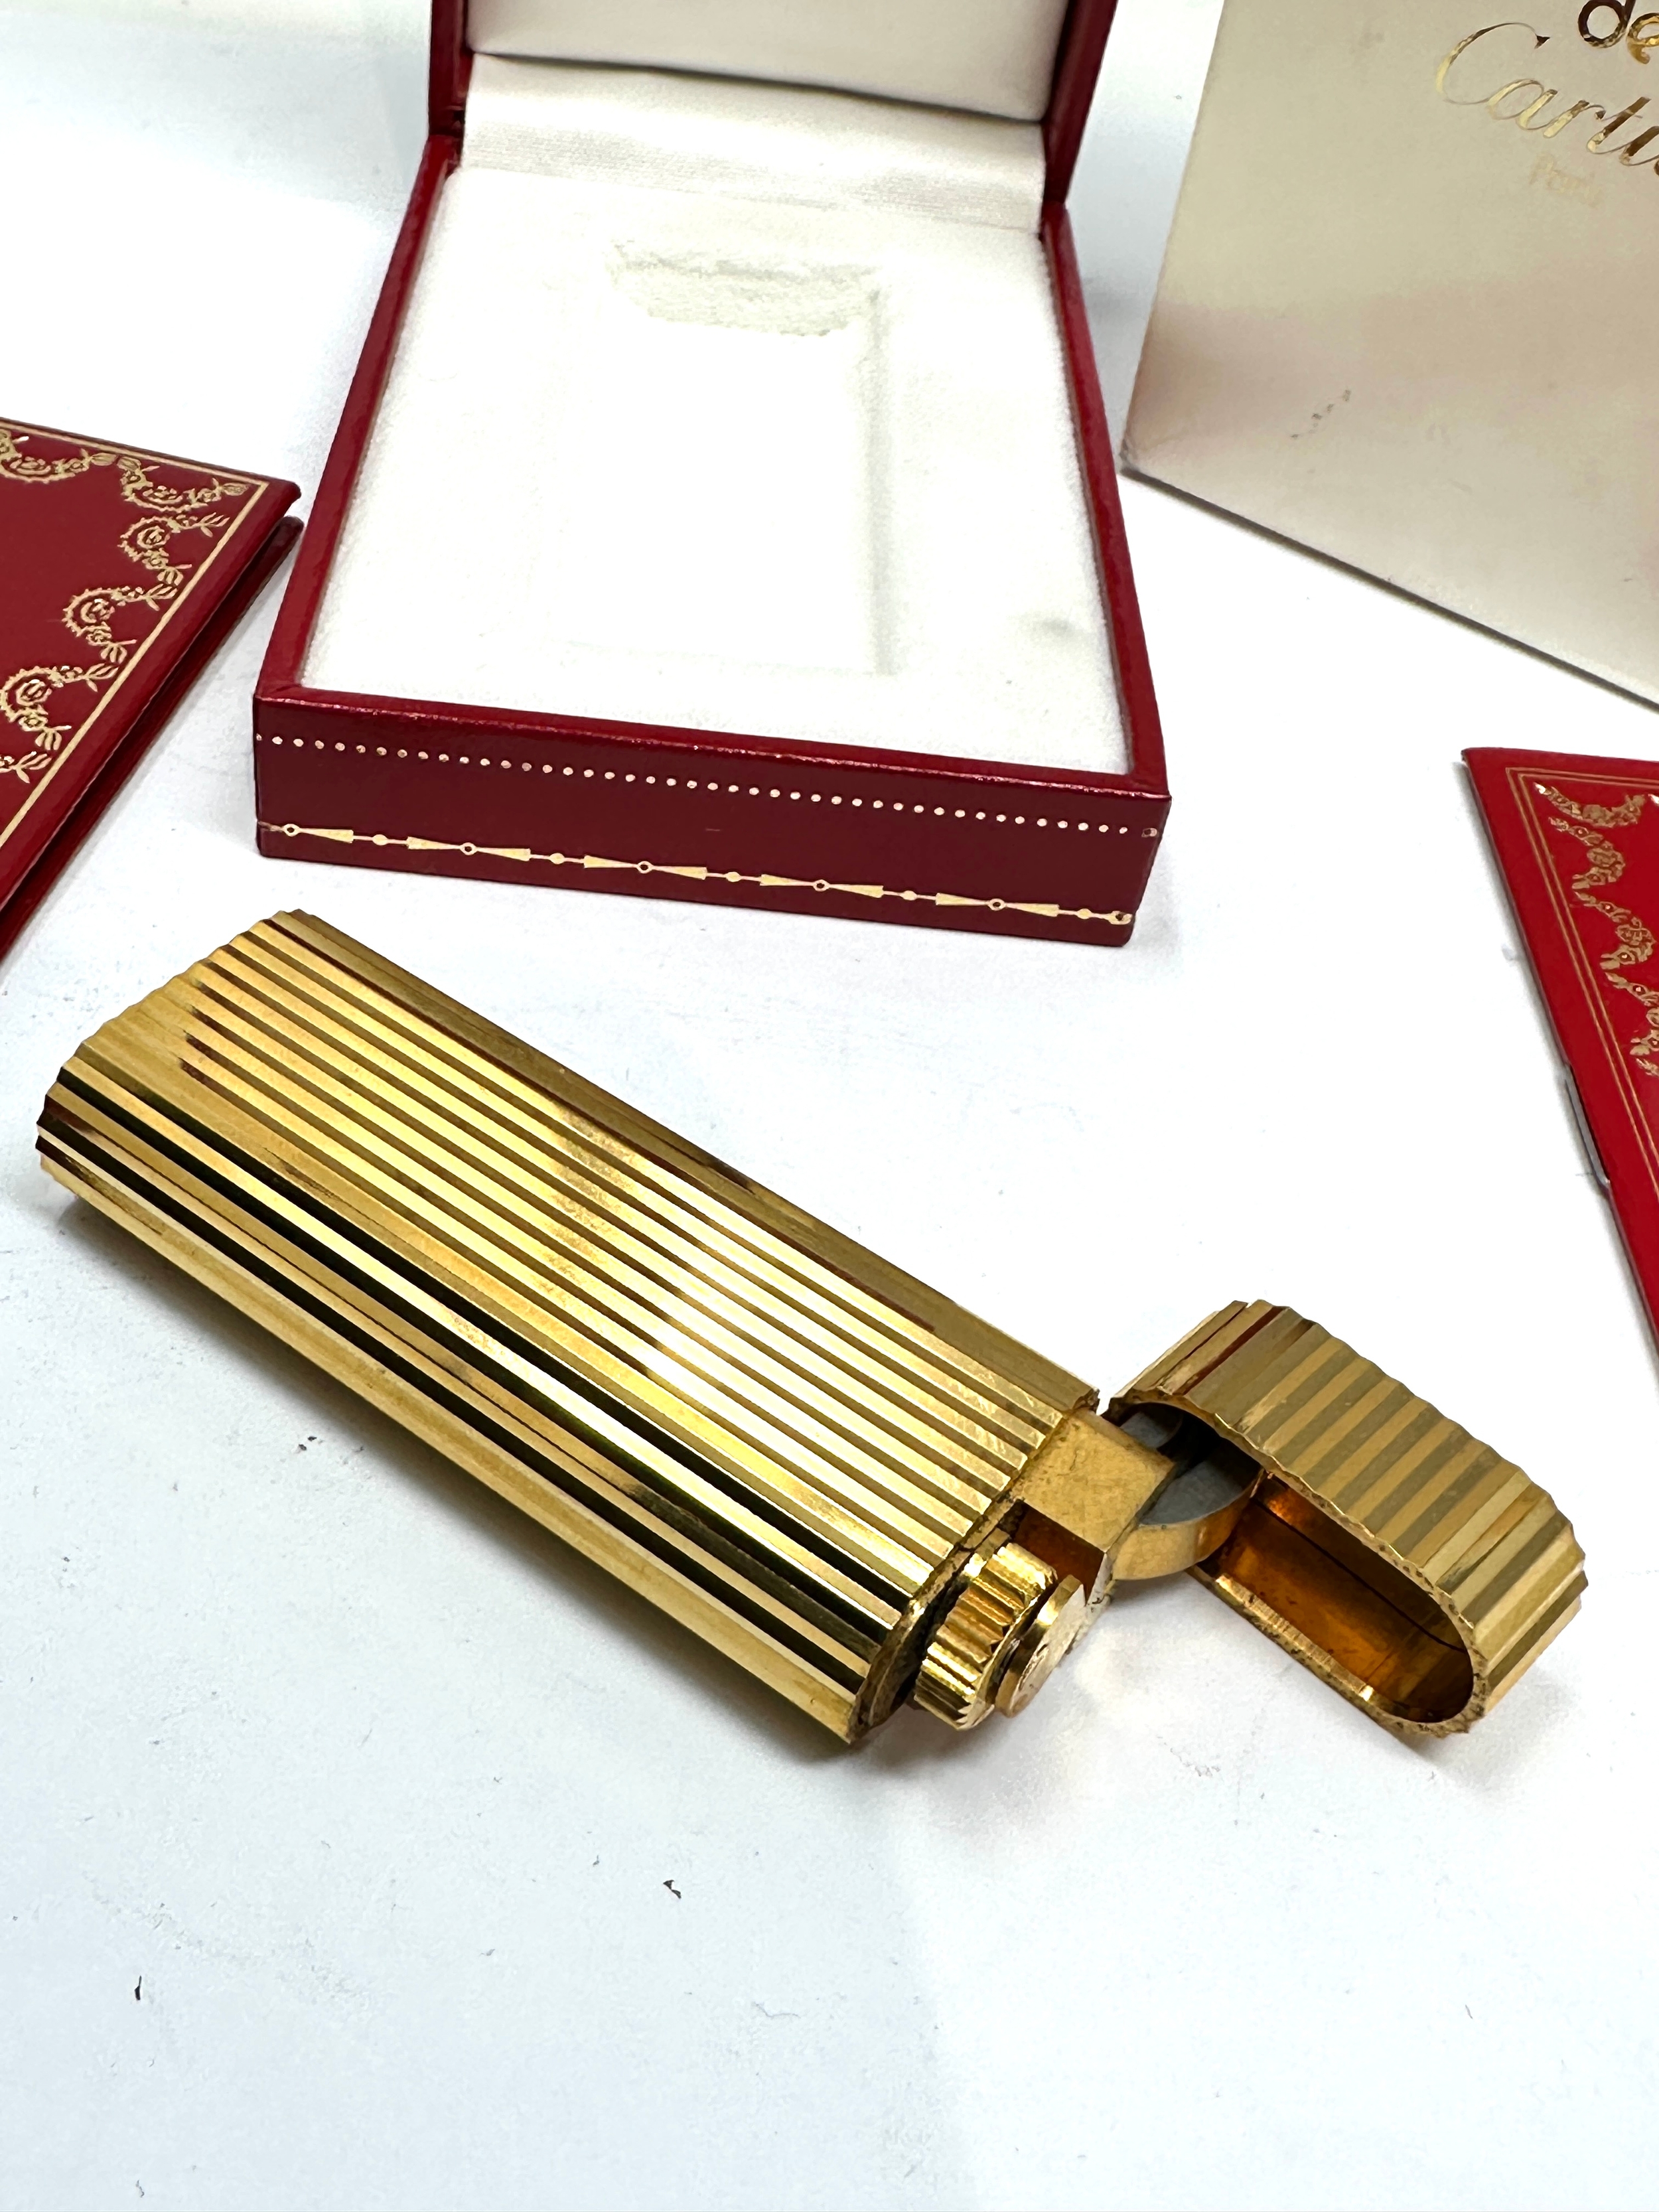 Original boxed Cartier cigarette lighter in as new condition complete with boxes and booklet - Bild 3 aus 4